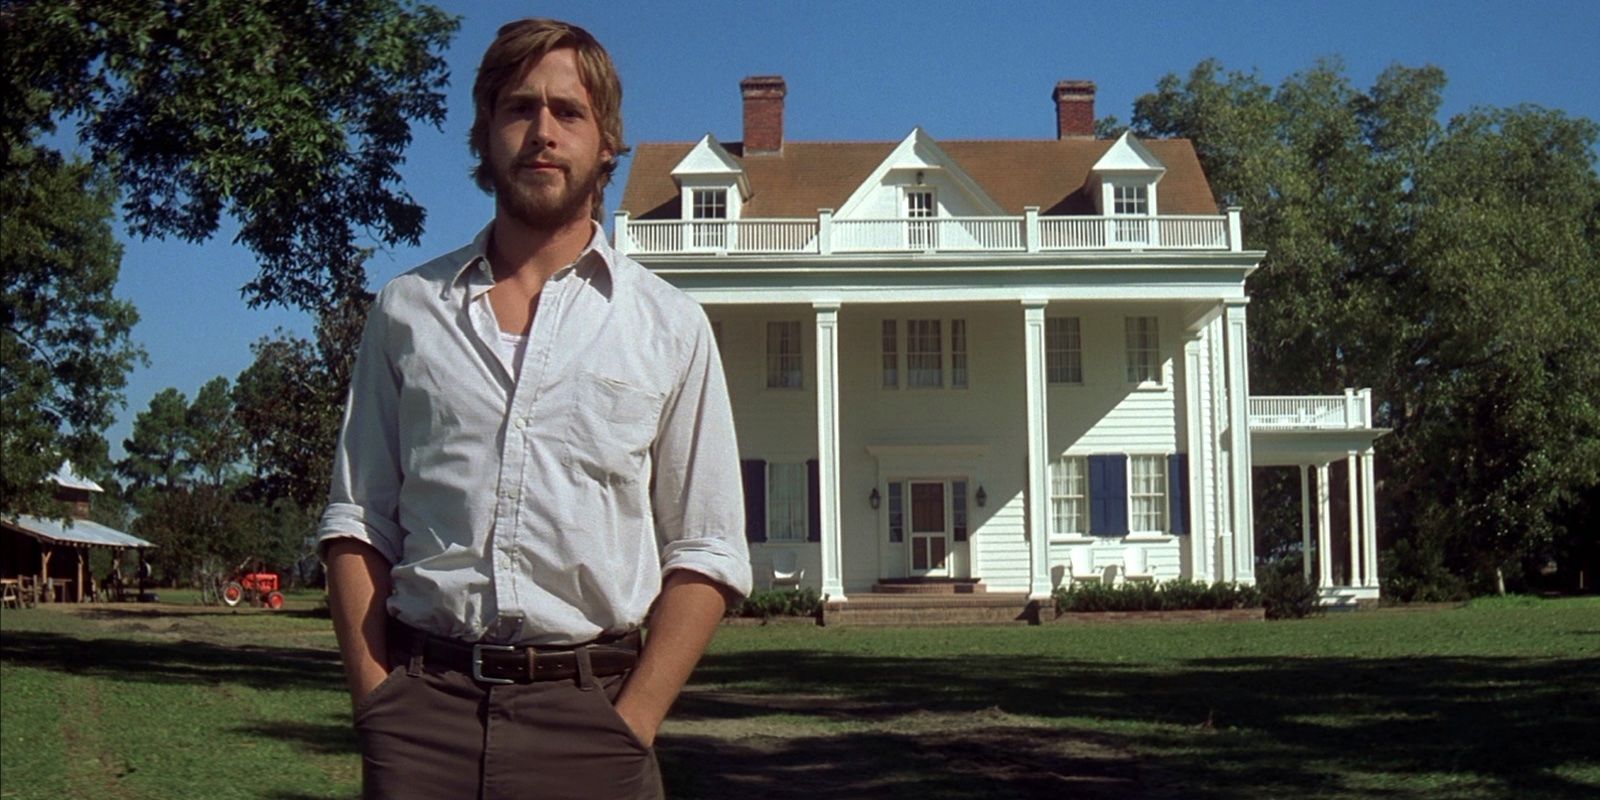 Noah standing in front of the house he built in The Notebook